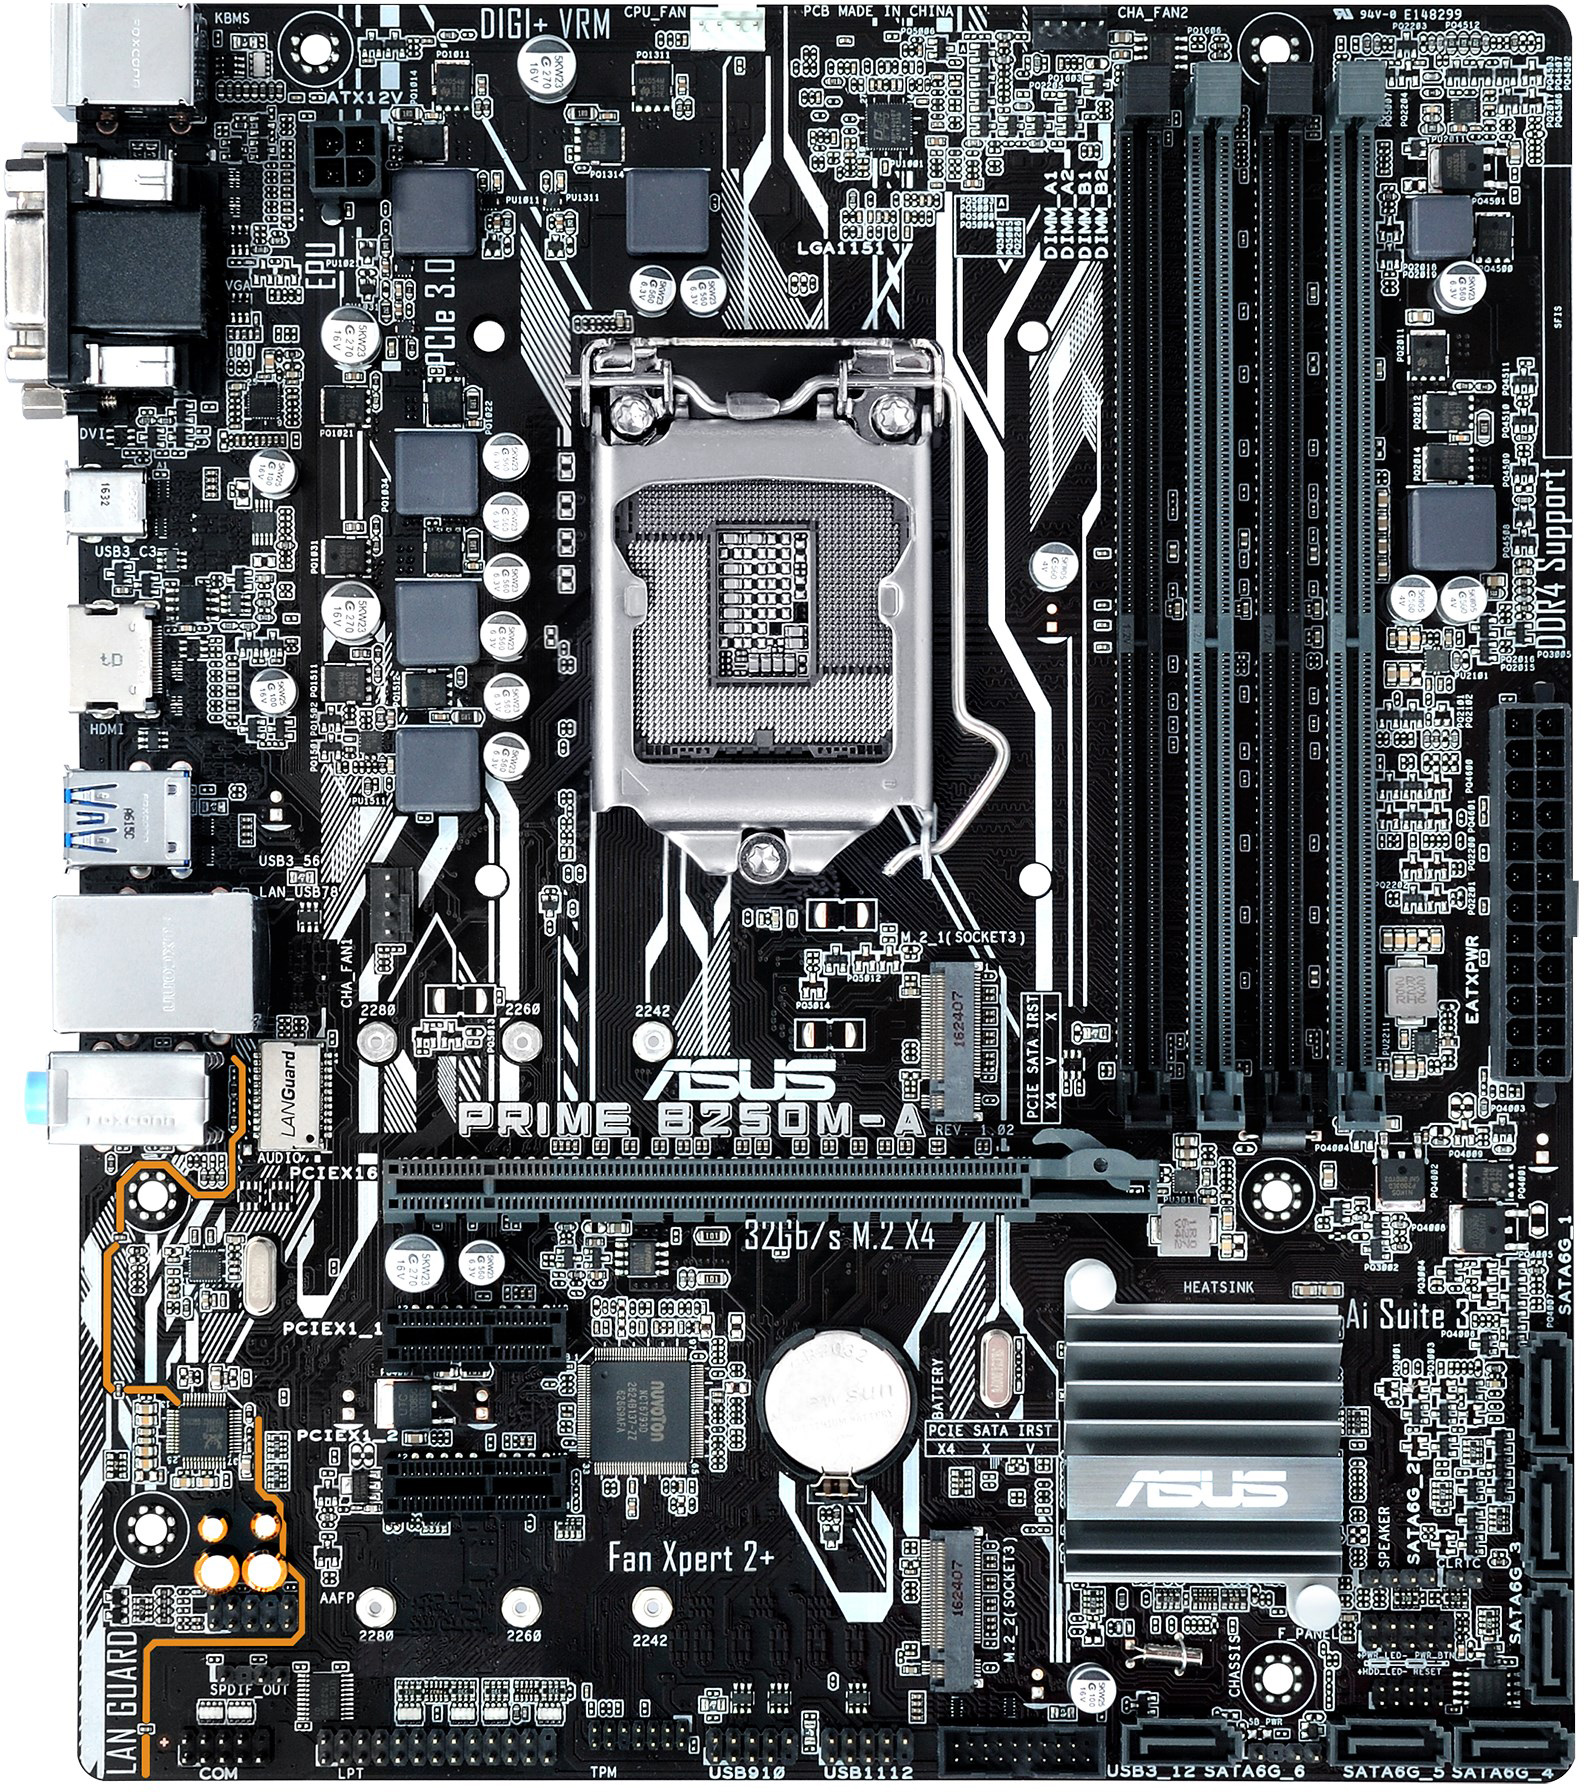 Asus Prime B250M-A - Motherboard Specifications On MotherboardDB